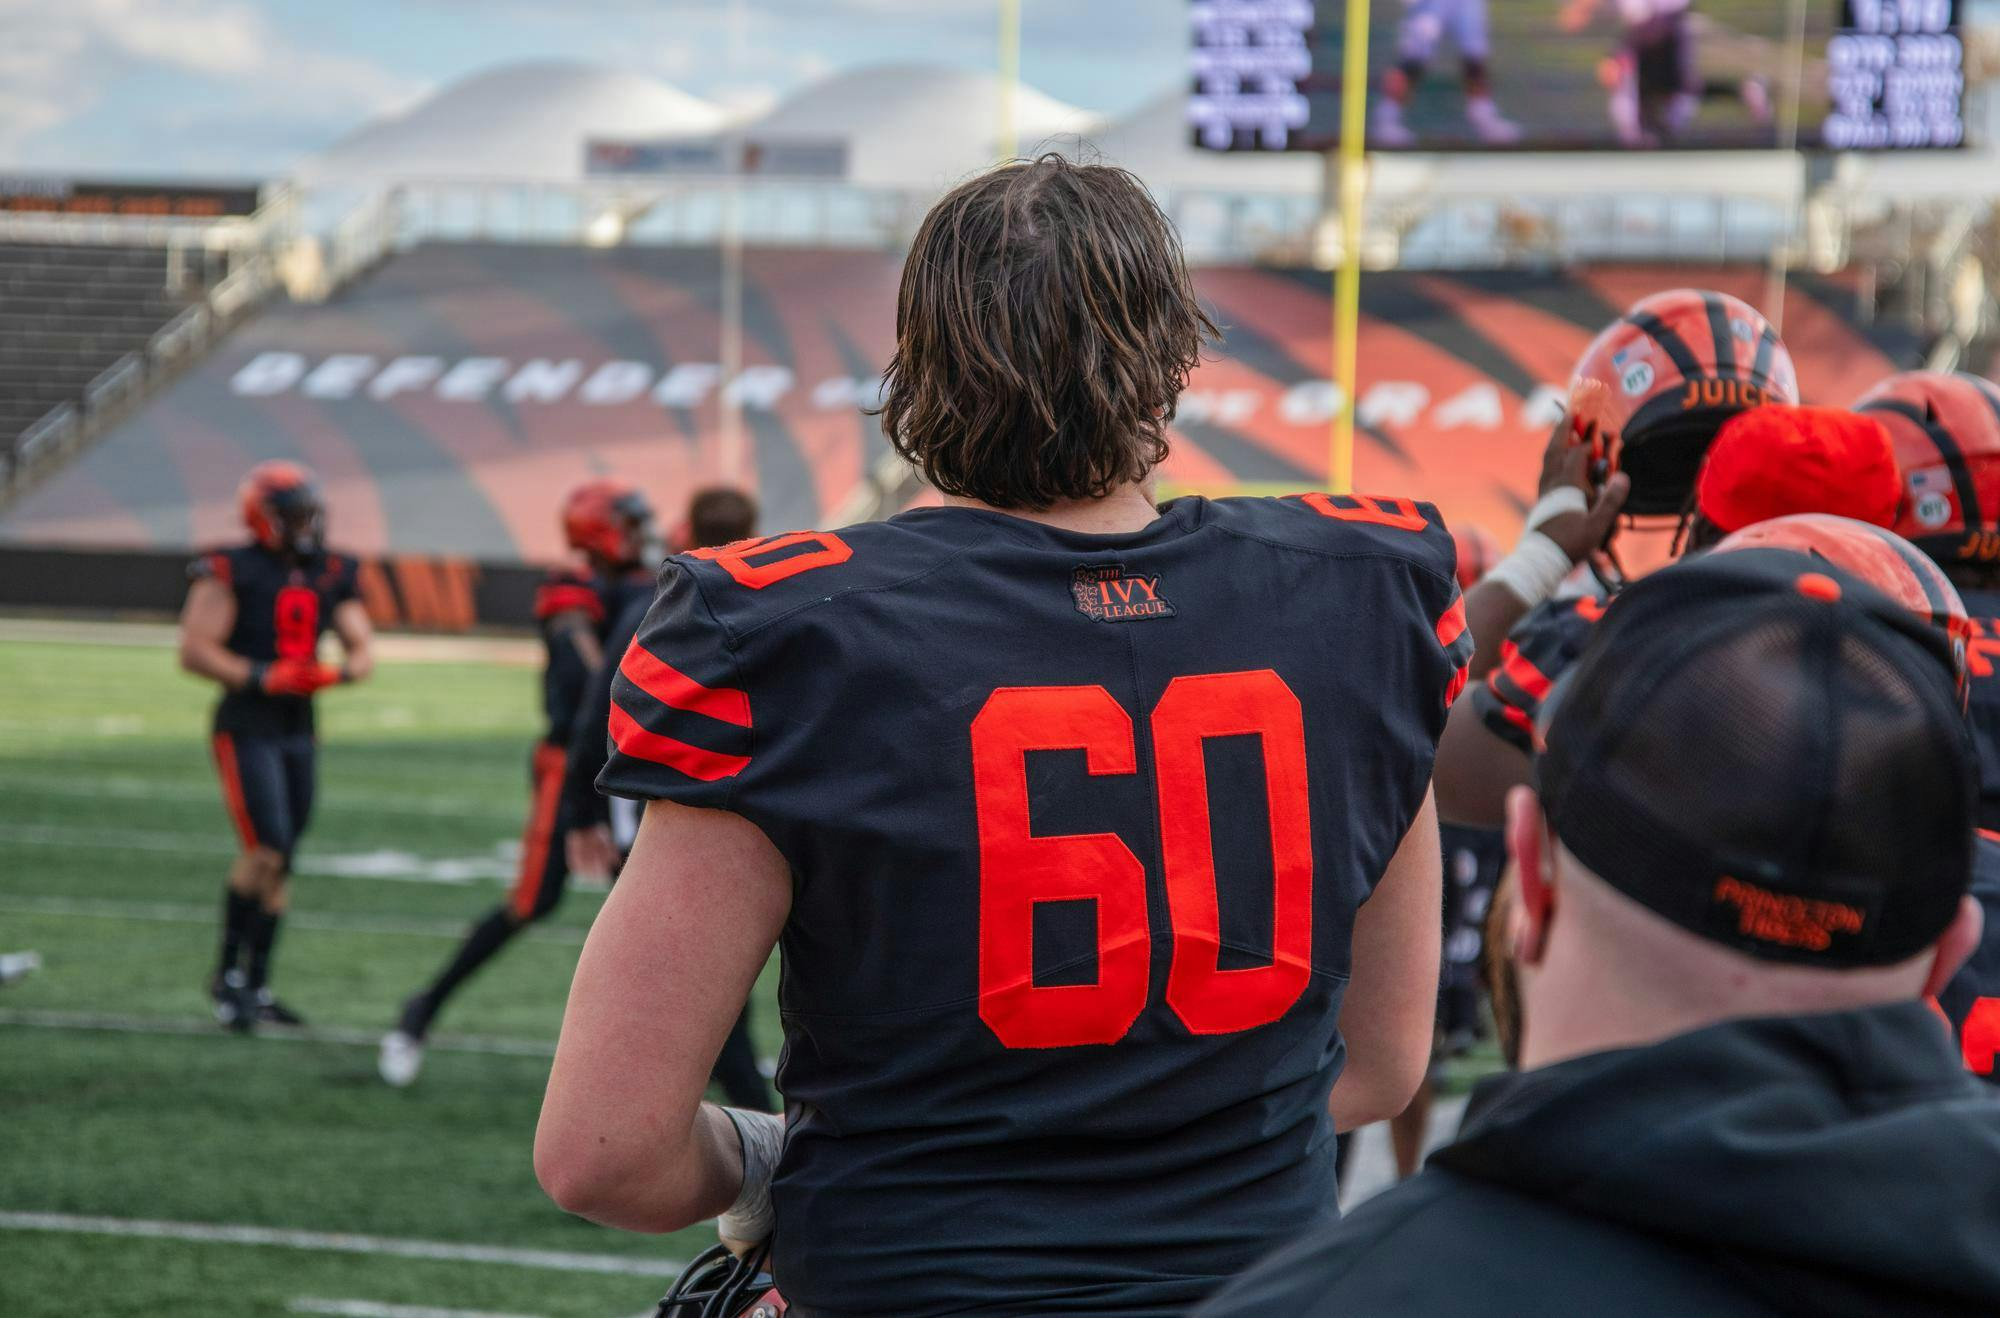 A football player in Princeton colors with the number 80 watches the scoreboard.